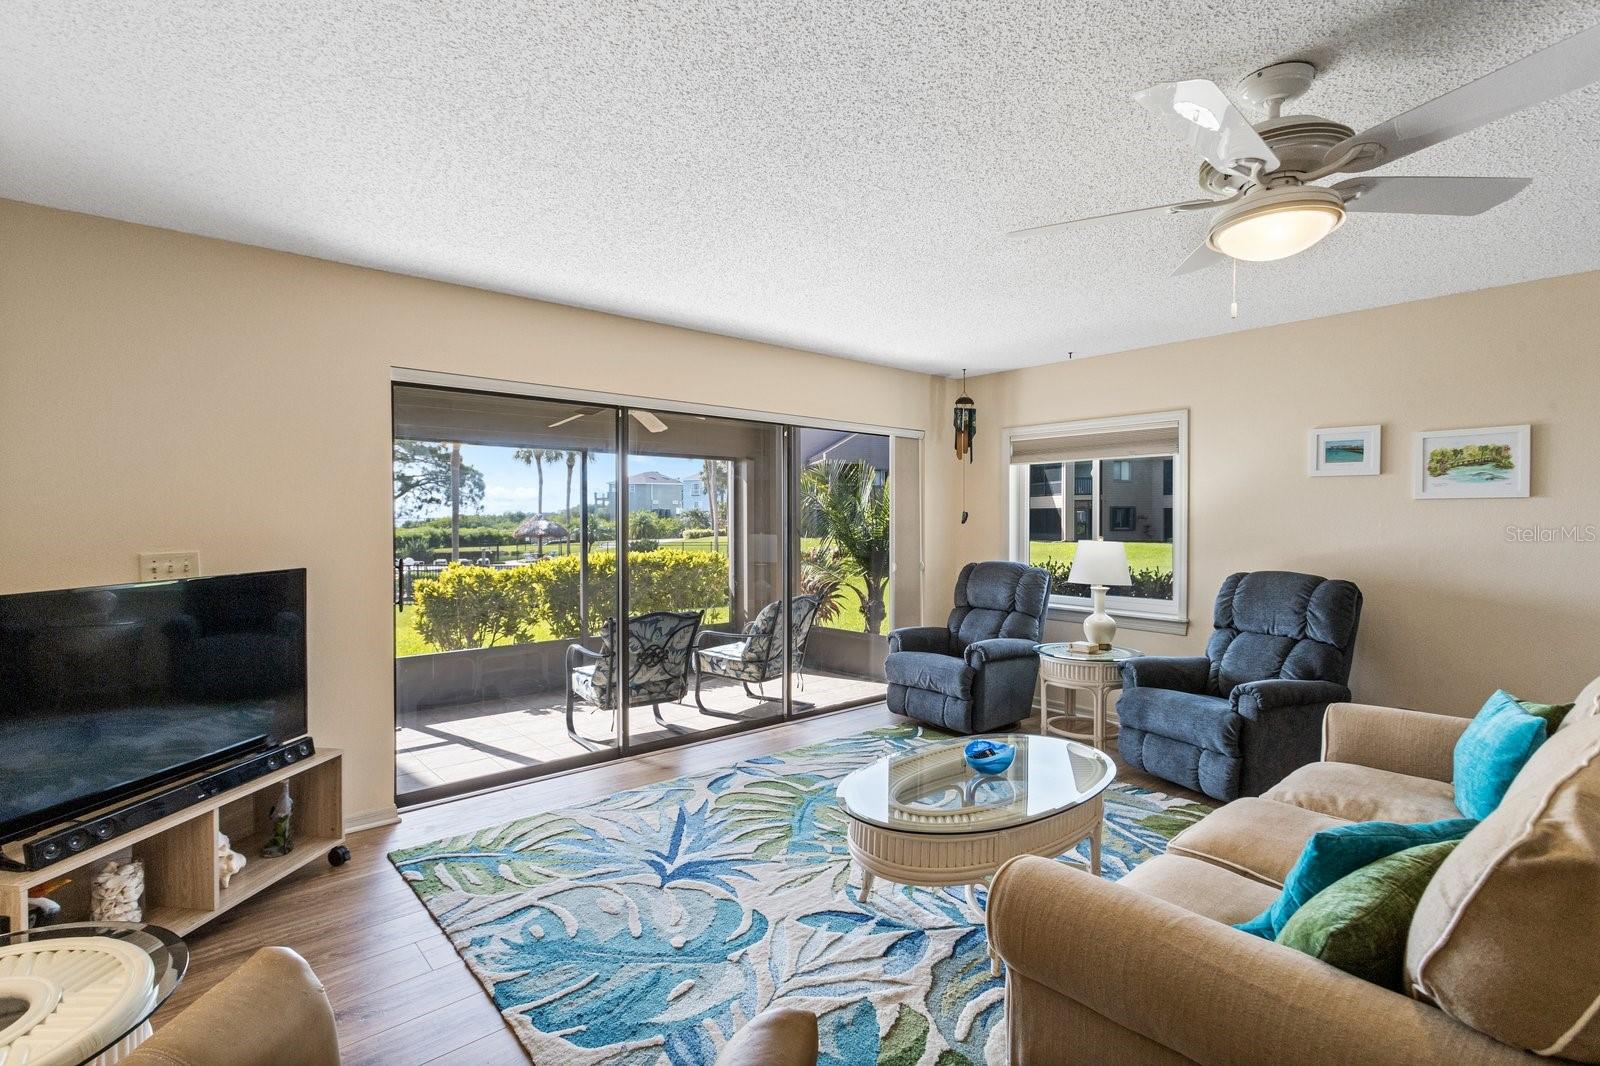 Enjoy a view of the pool and the Gulf right from your living room.